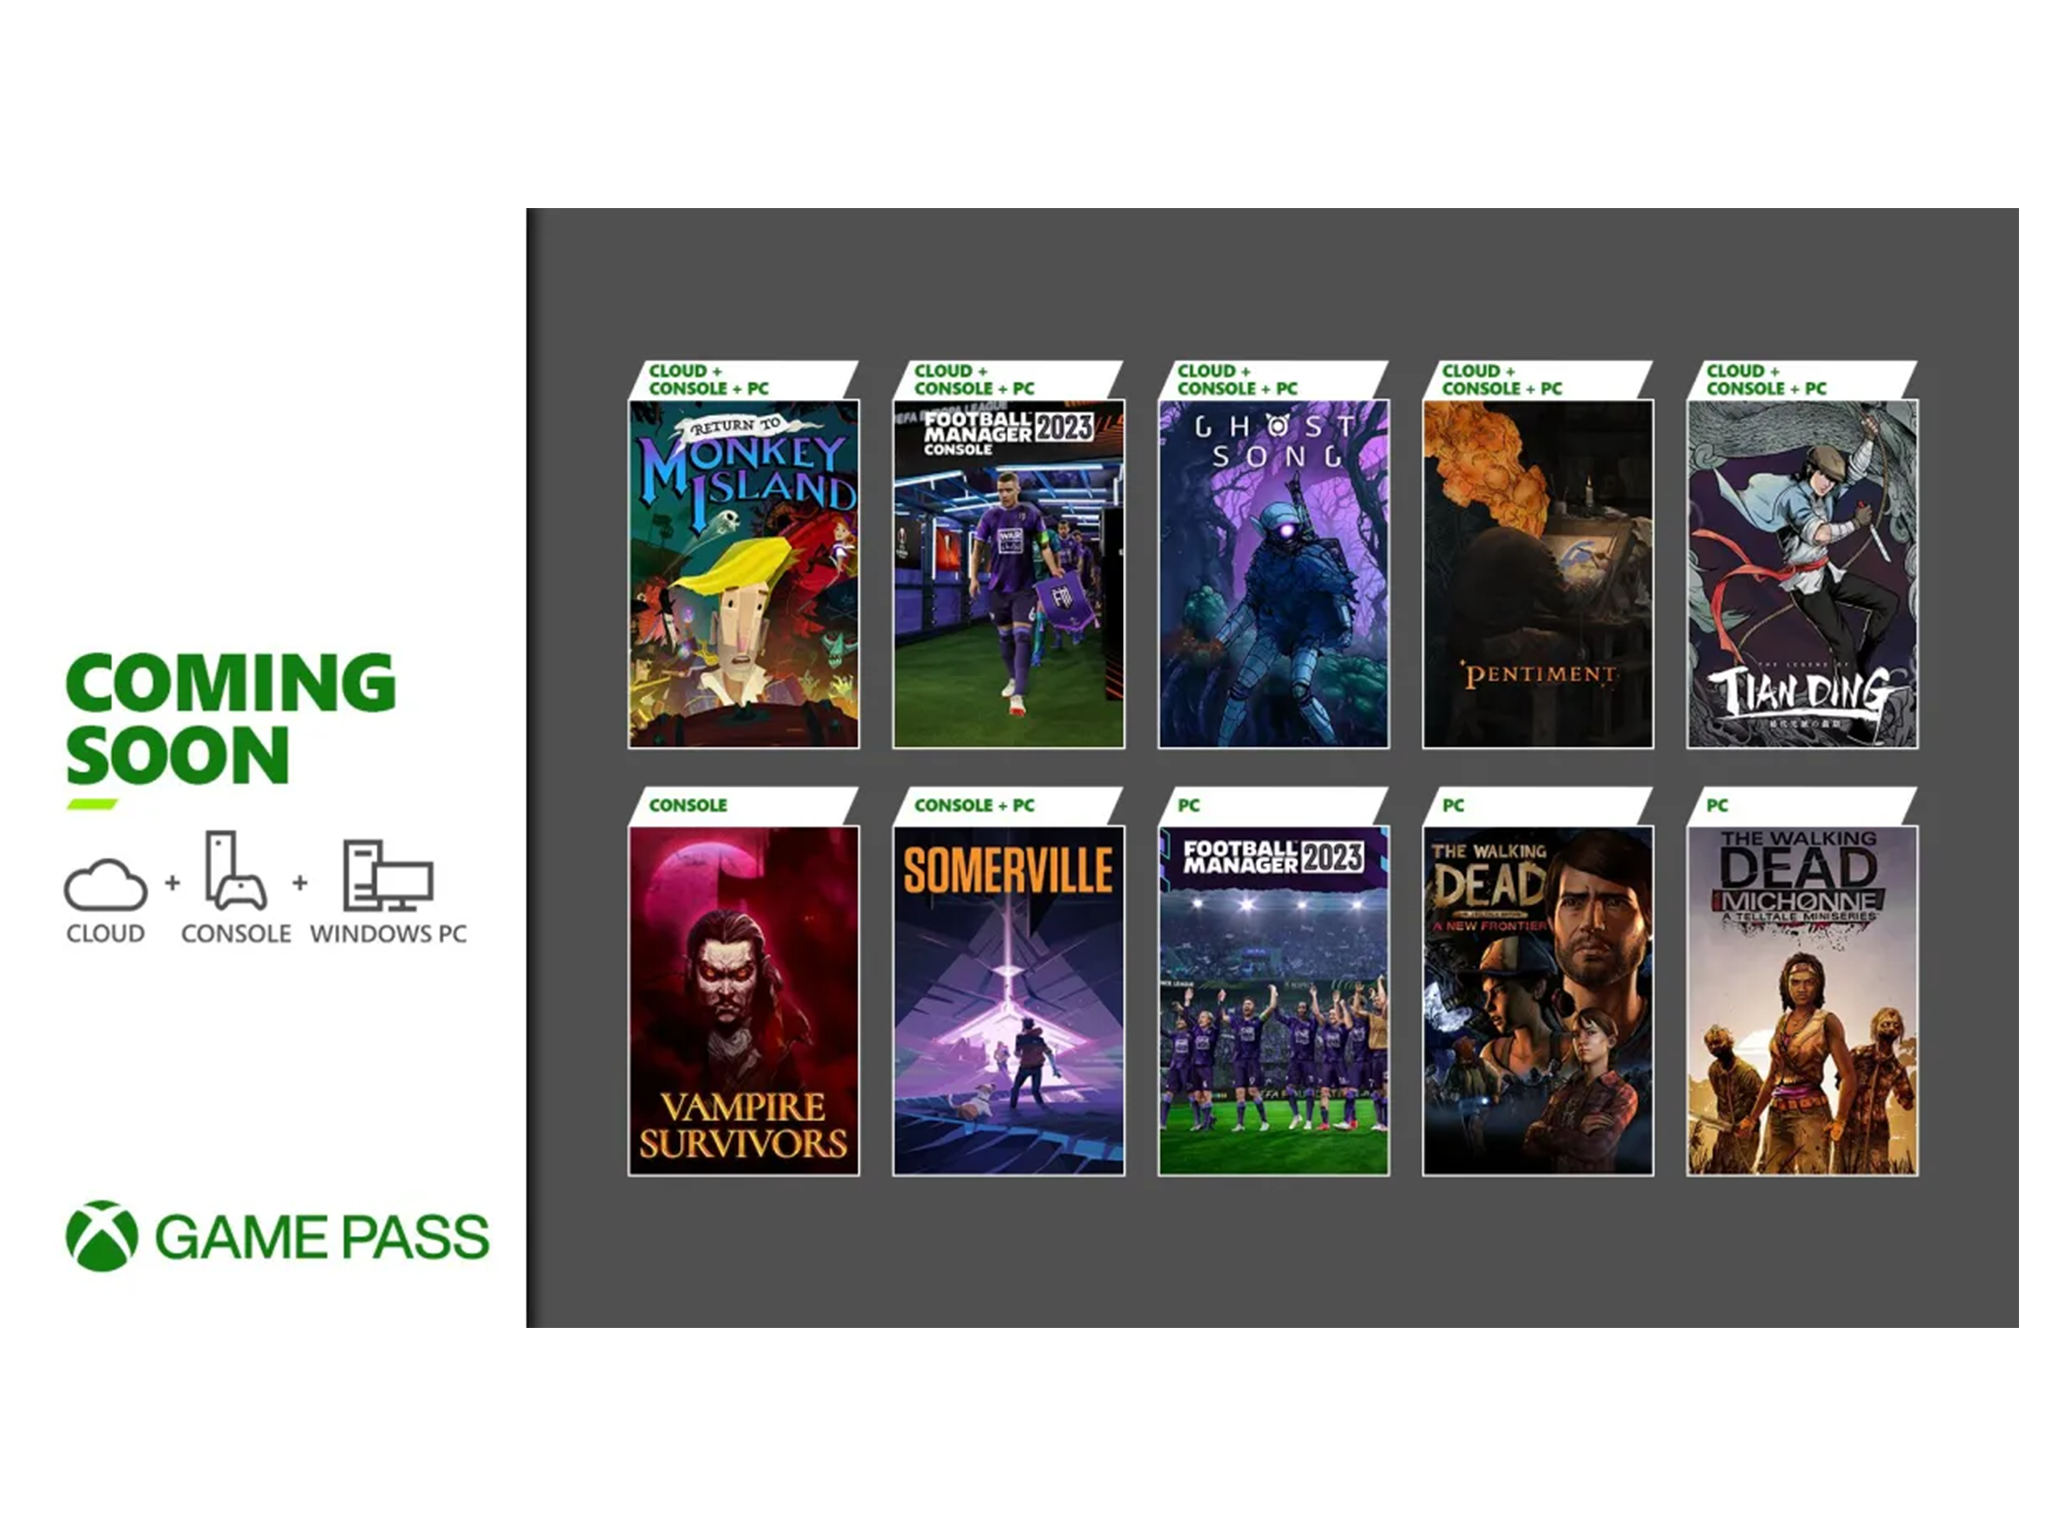 Here's what's coming to Xbox Game Pass in November